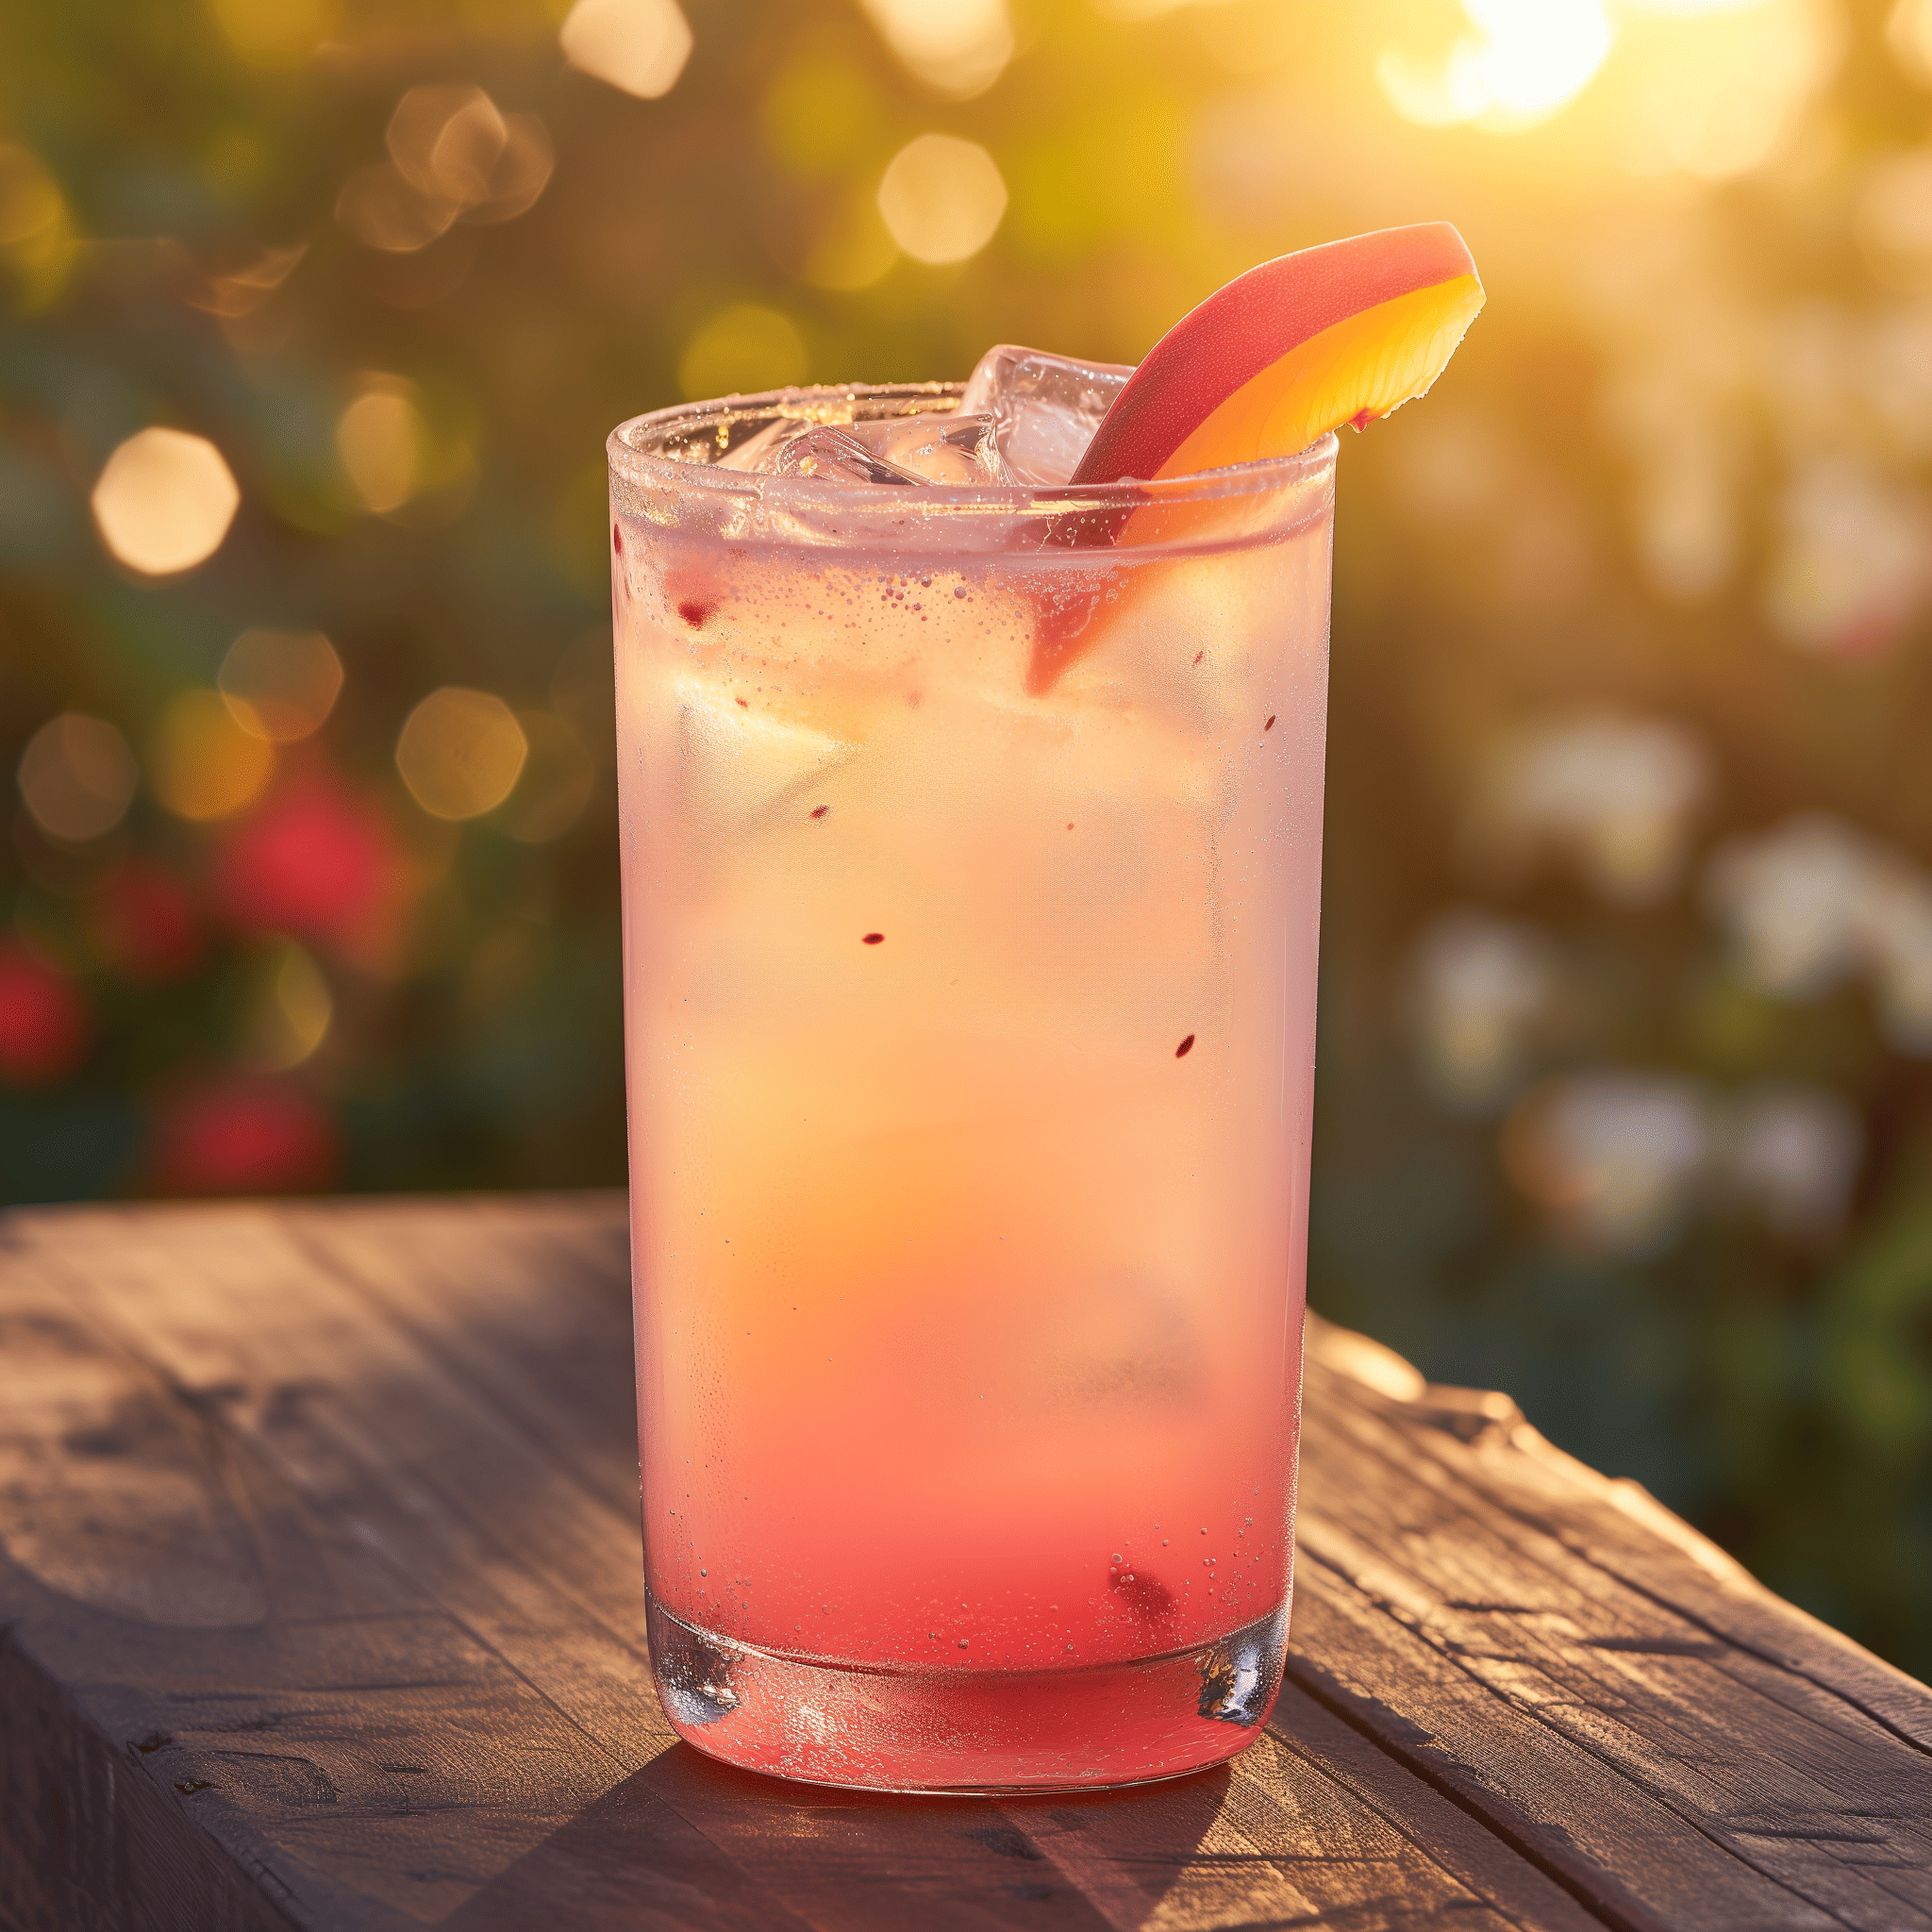 Blush Cocktail Recipe - The Blush cocktail offers a delightful balance of sweet and tart flavors. The crispness of the apple juice complements the tartness of the cranberry, while the white wine provides a sophisticated backdrop. The vodka adds a smooth kick, and the orange liqueur brings a subtle citrus note to the mix.